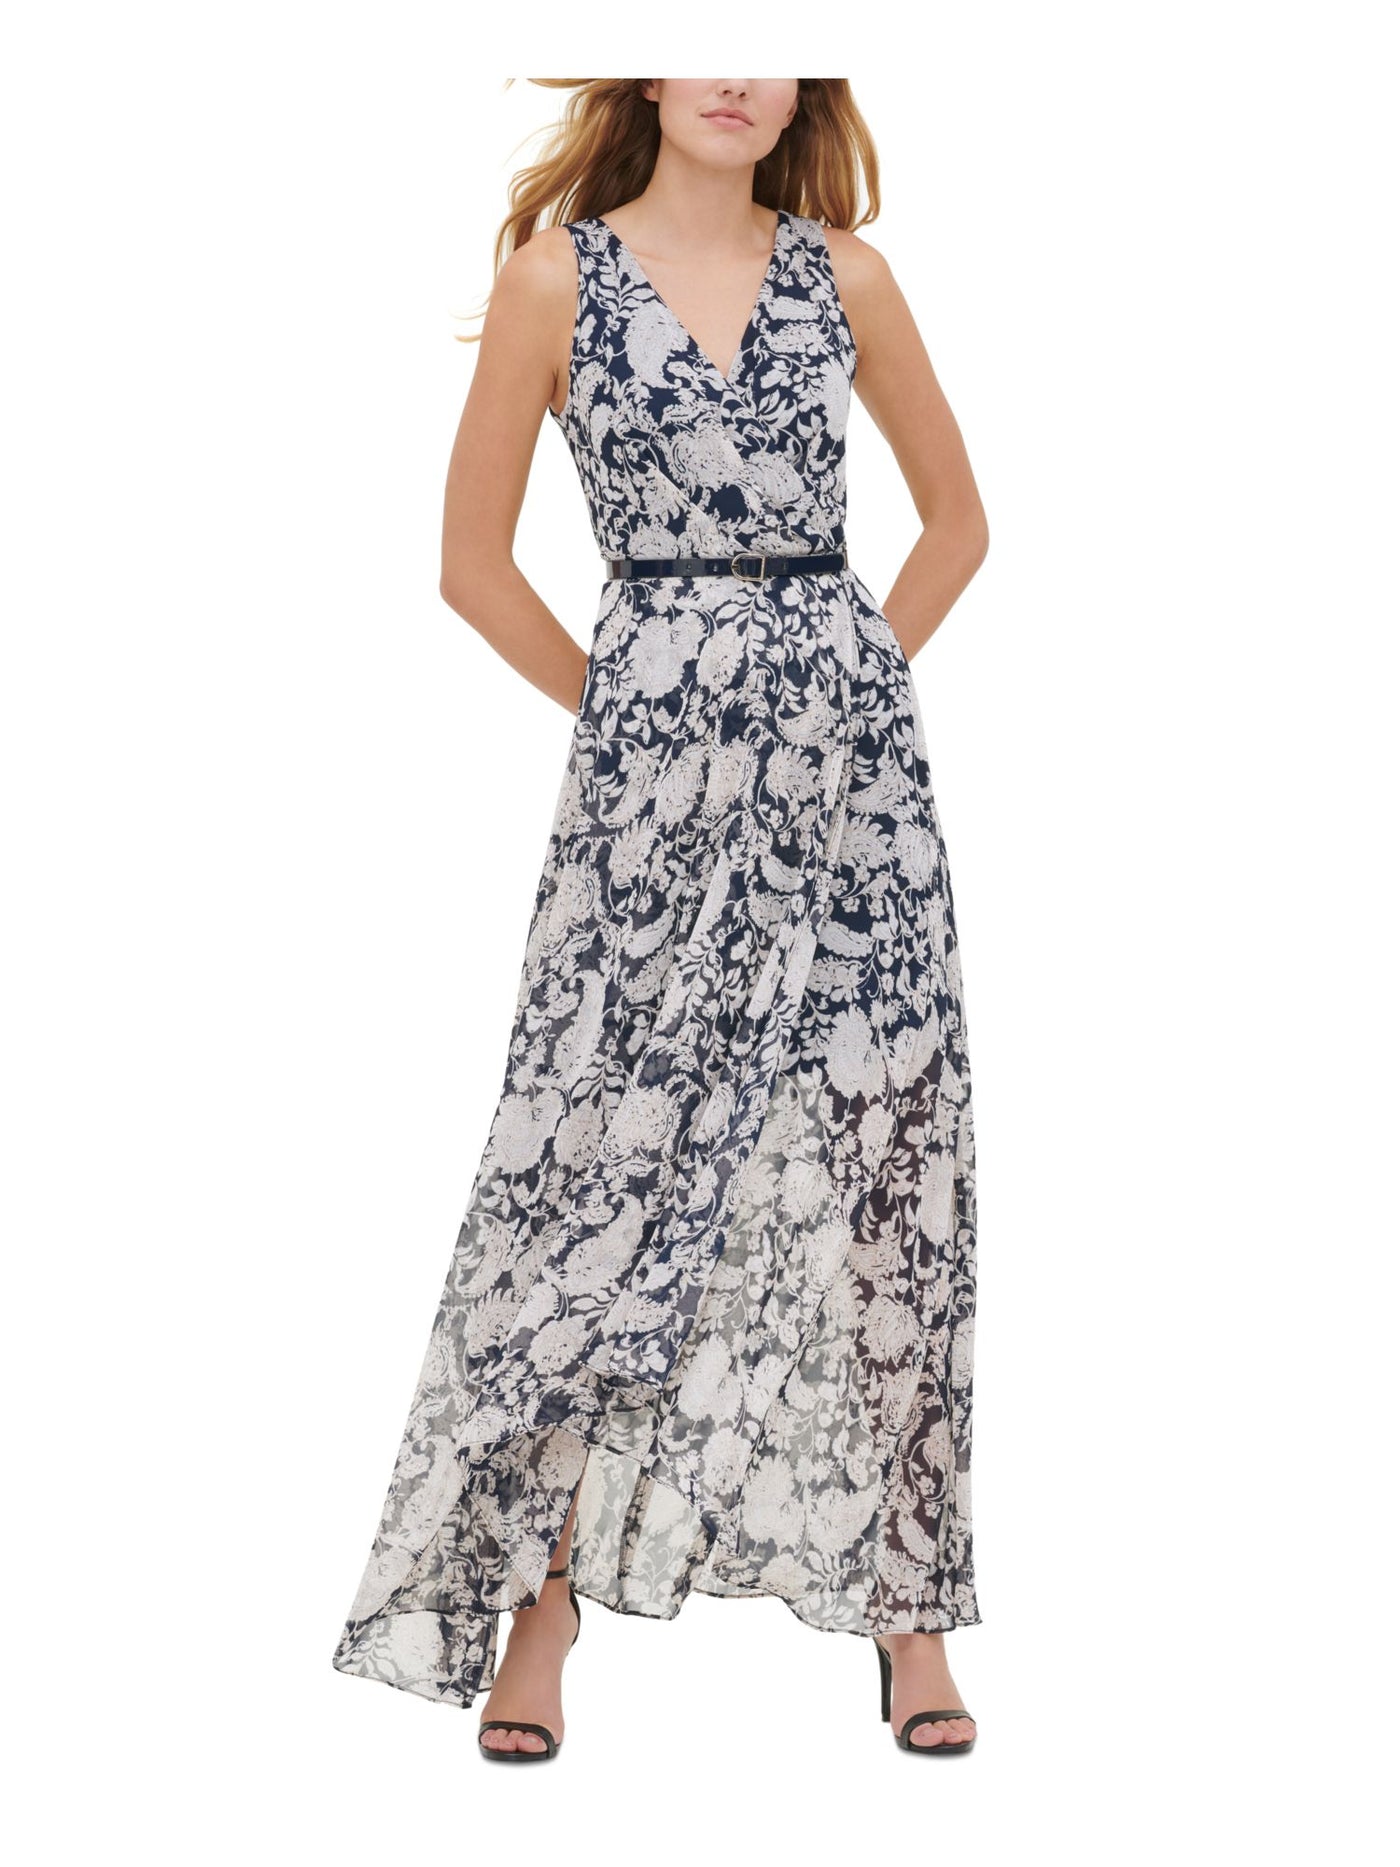 TOMMY HILFIGER Womens Navy Belted Zippered Lined Floral Sleeveless Surplice Neckline Maxi Evening Dress 8